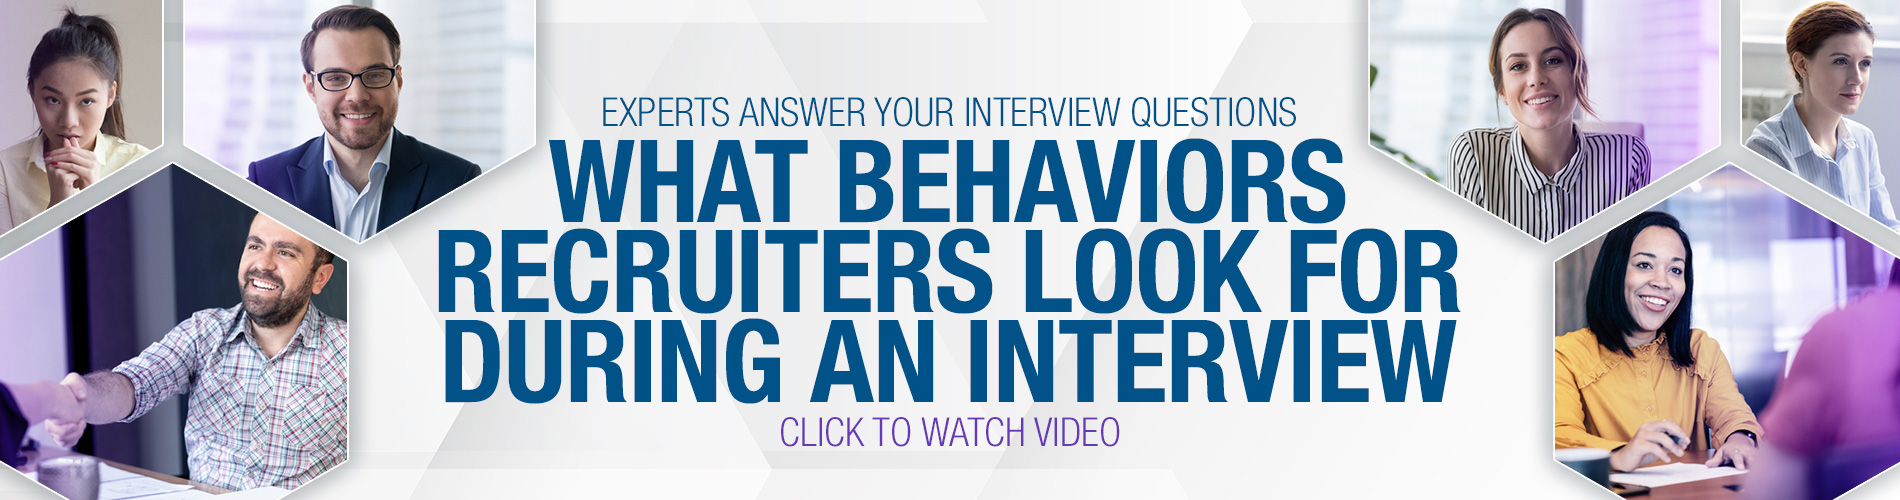 Express Jobs What Behaviors Recruiters Look For During An Interview